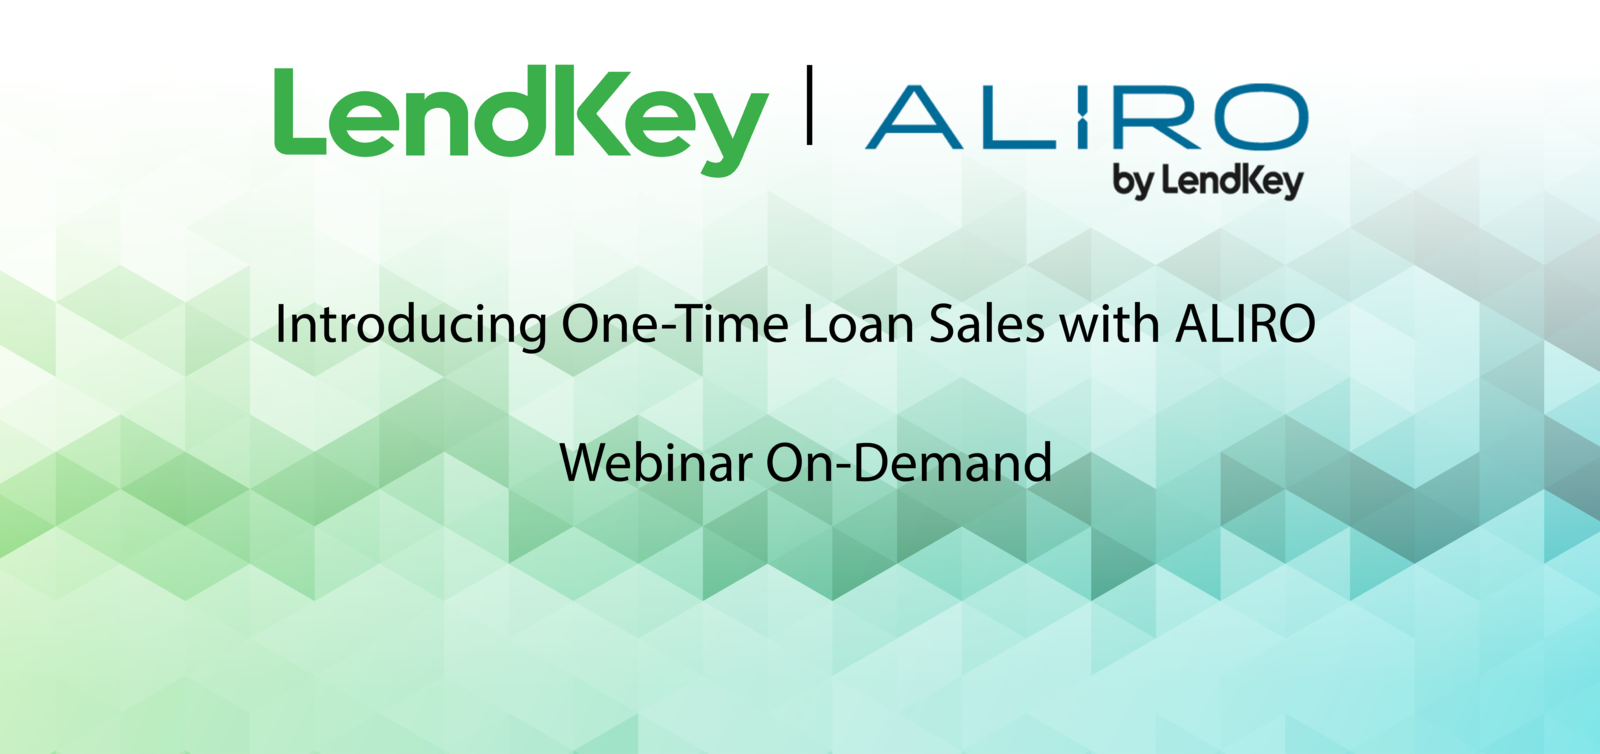 Featured image for “Introducing One-Time Loan Sales with ALIRO”